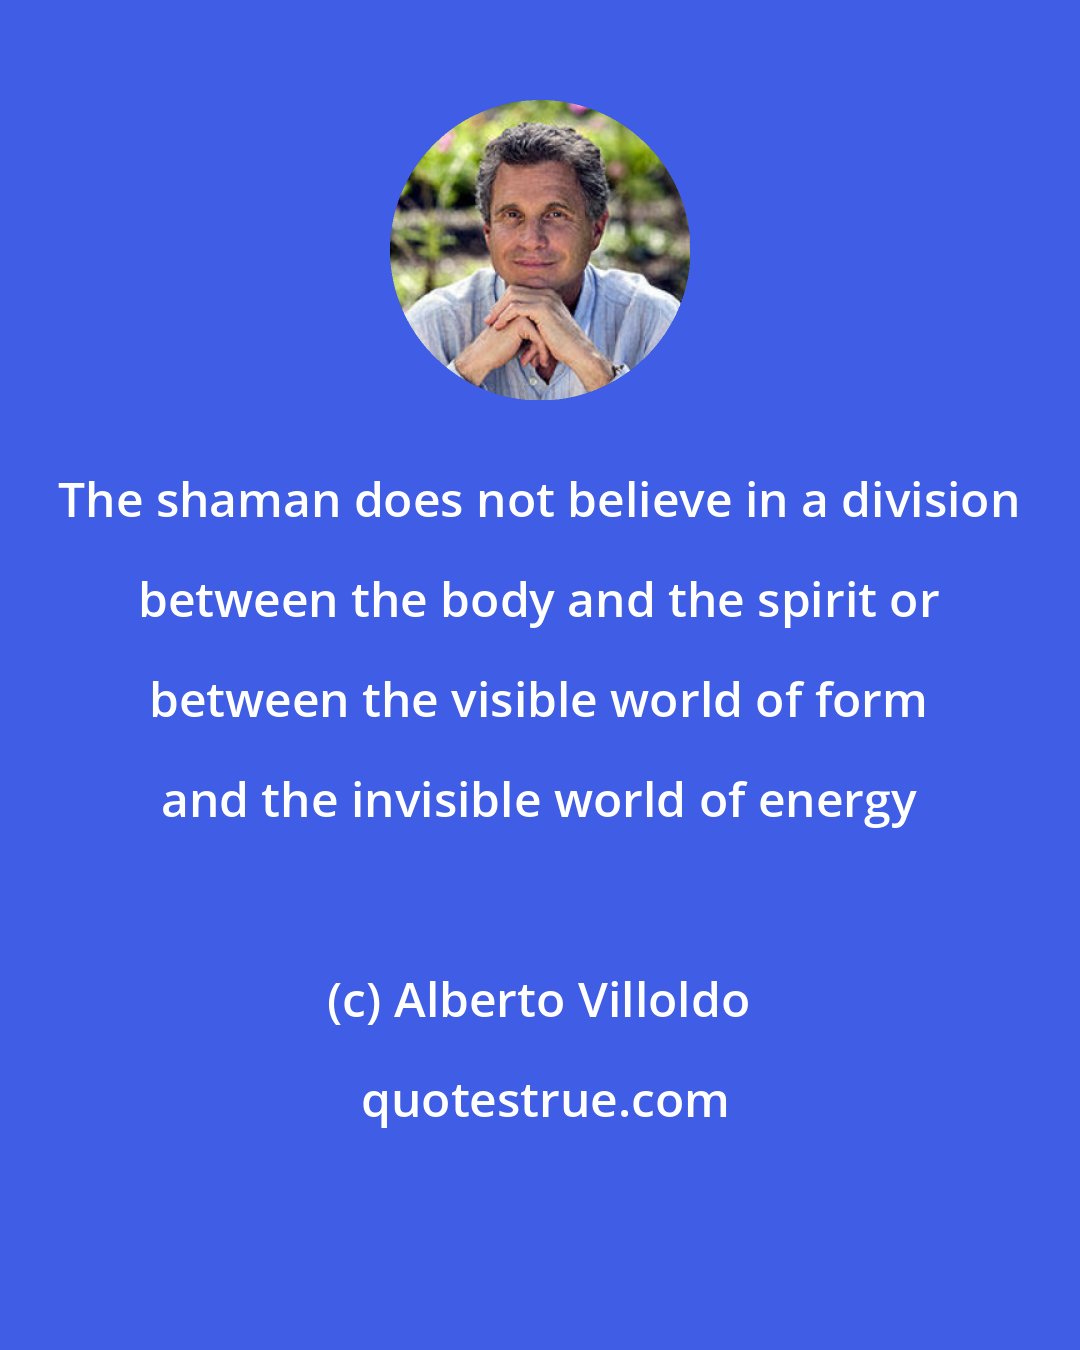 Alberto Villoldo: The shaman does not believe in a division between the body and the spirit or between the visible world of form and the invisible world of energy